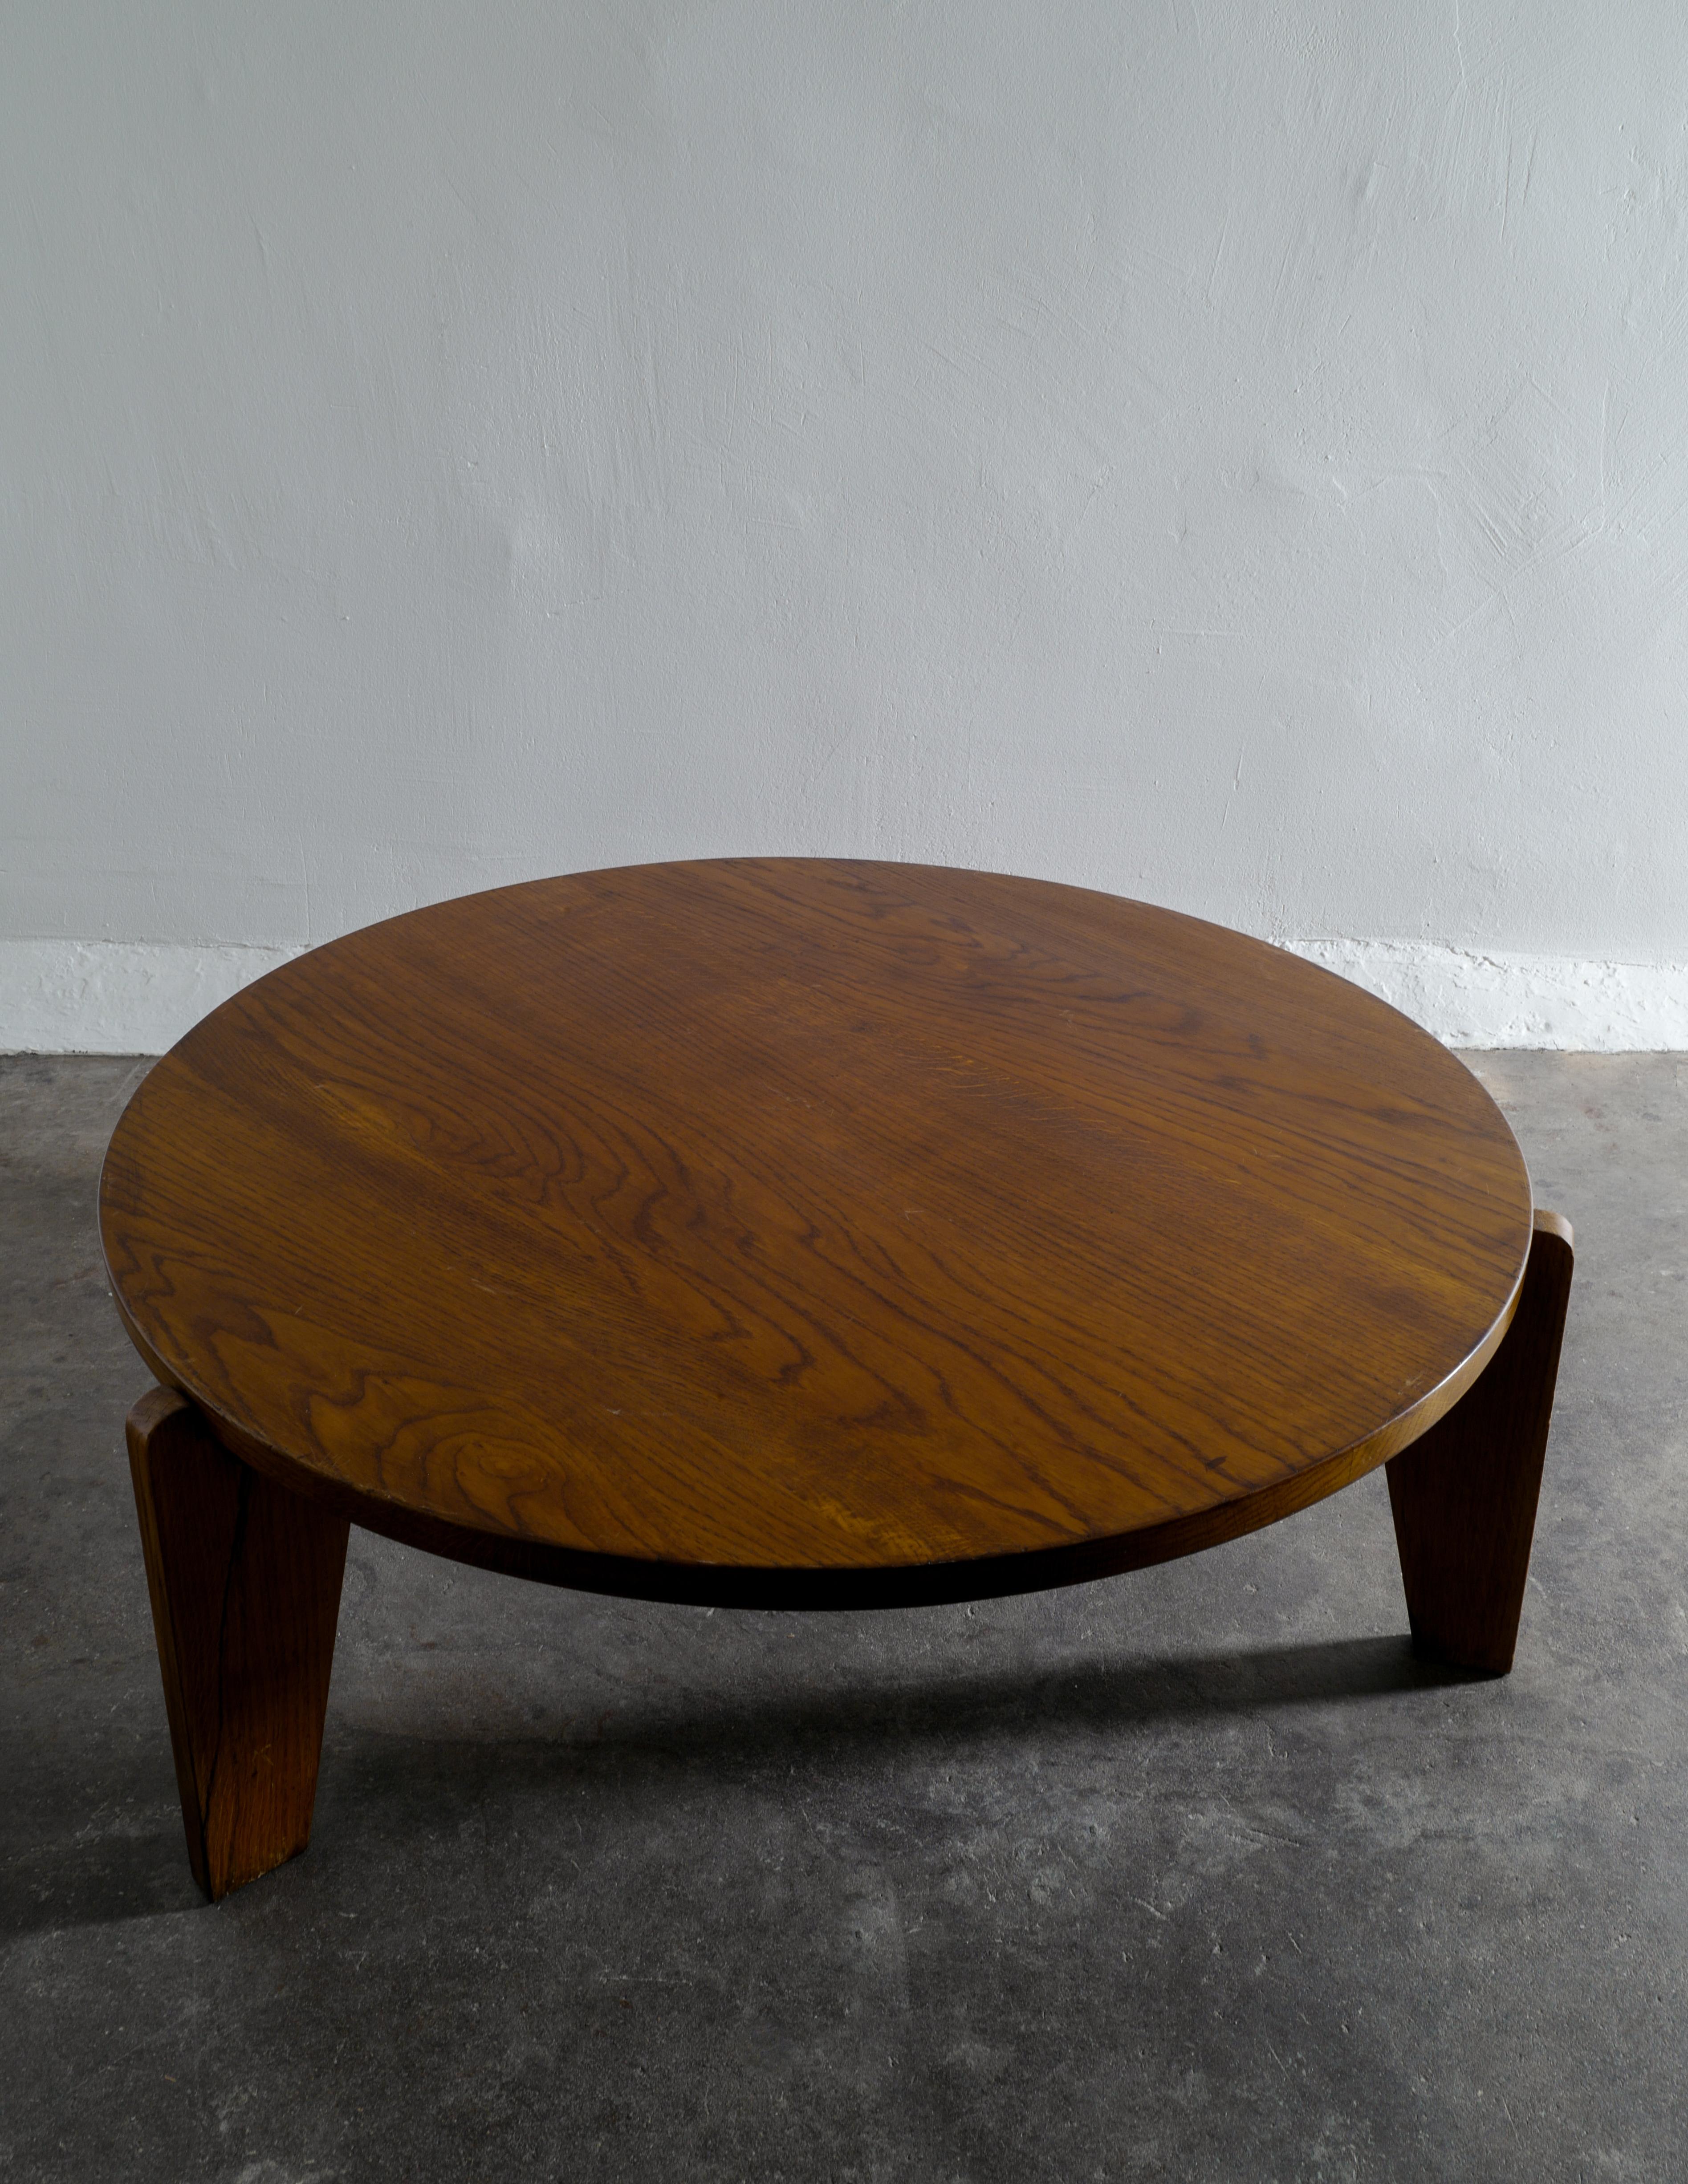 Stained Coffee Table in style of Jean Prouvé 